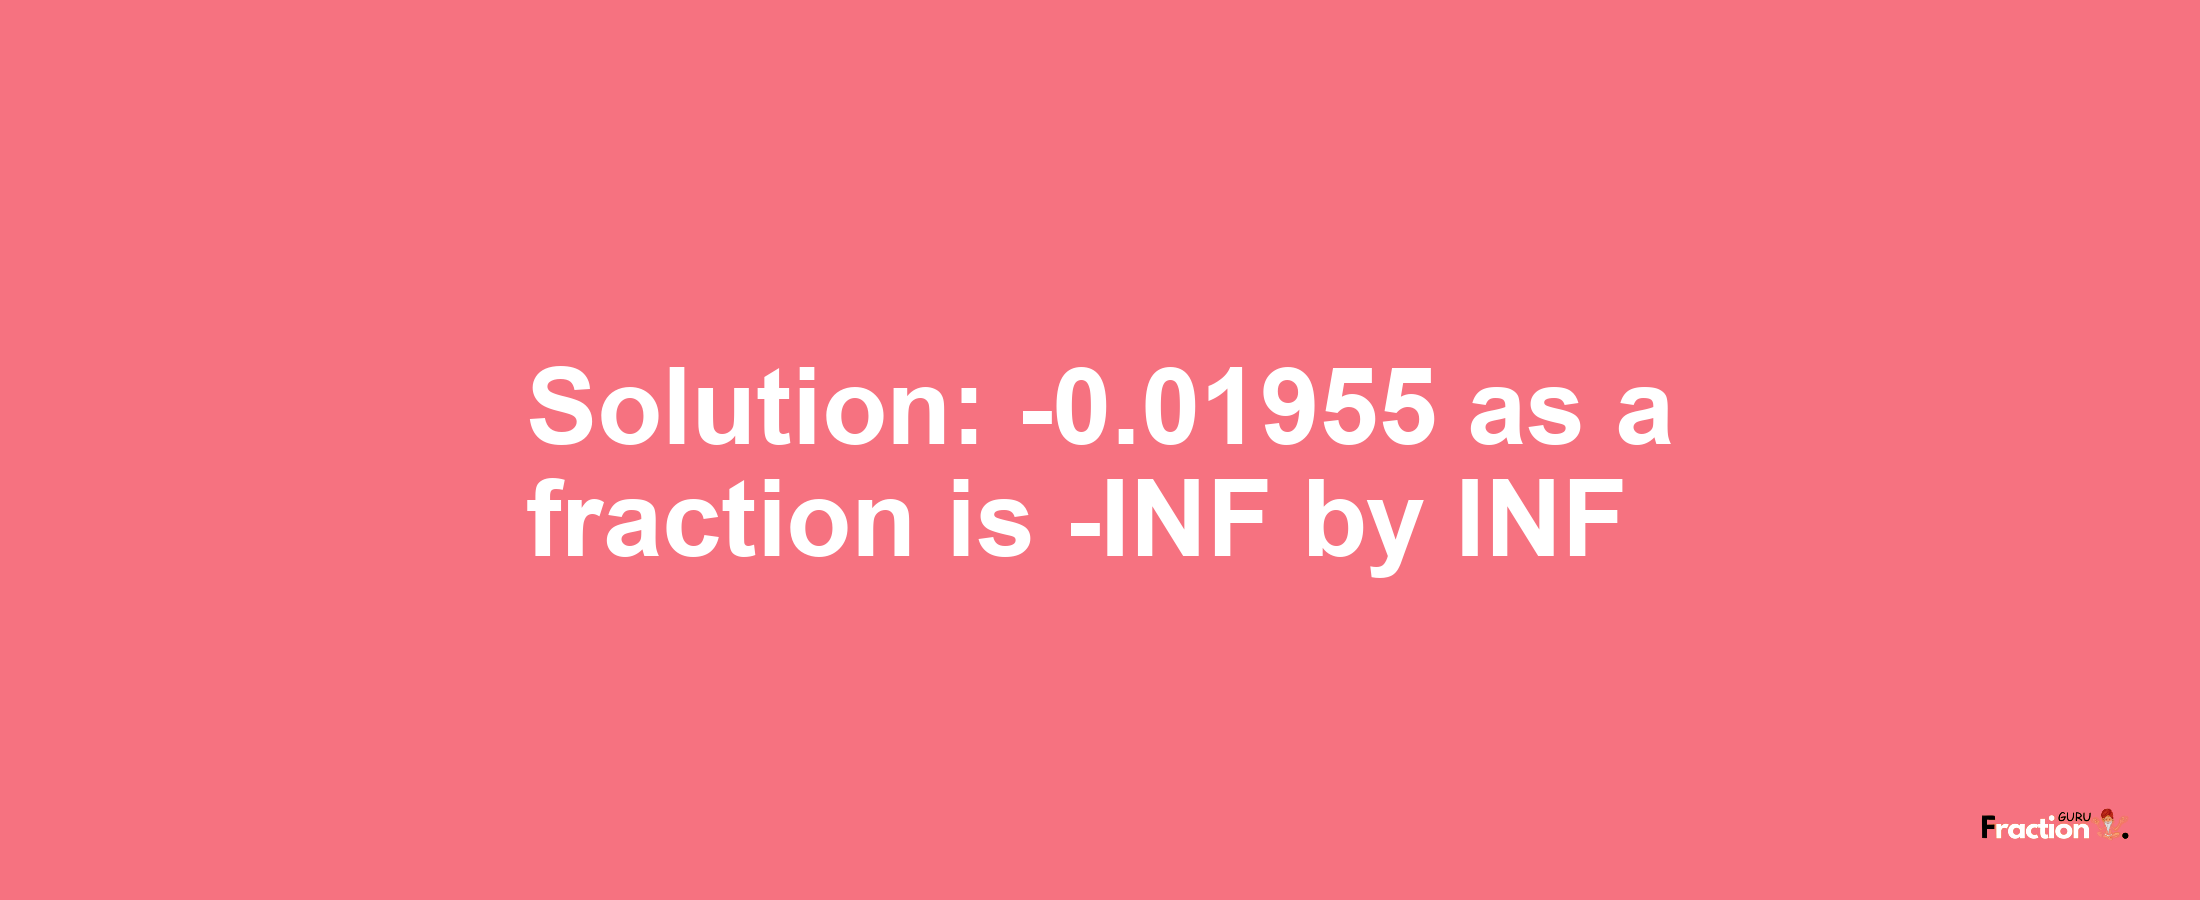 Solution:-0.01955 as a fraction is -INF/INF